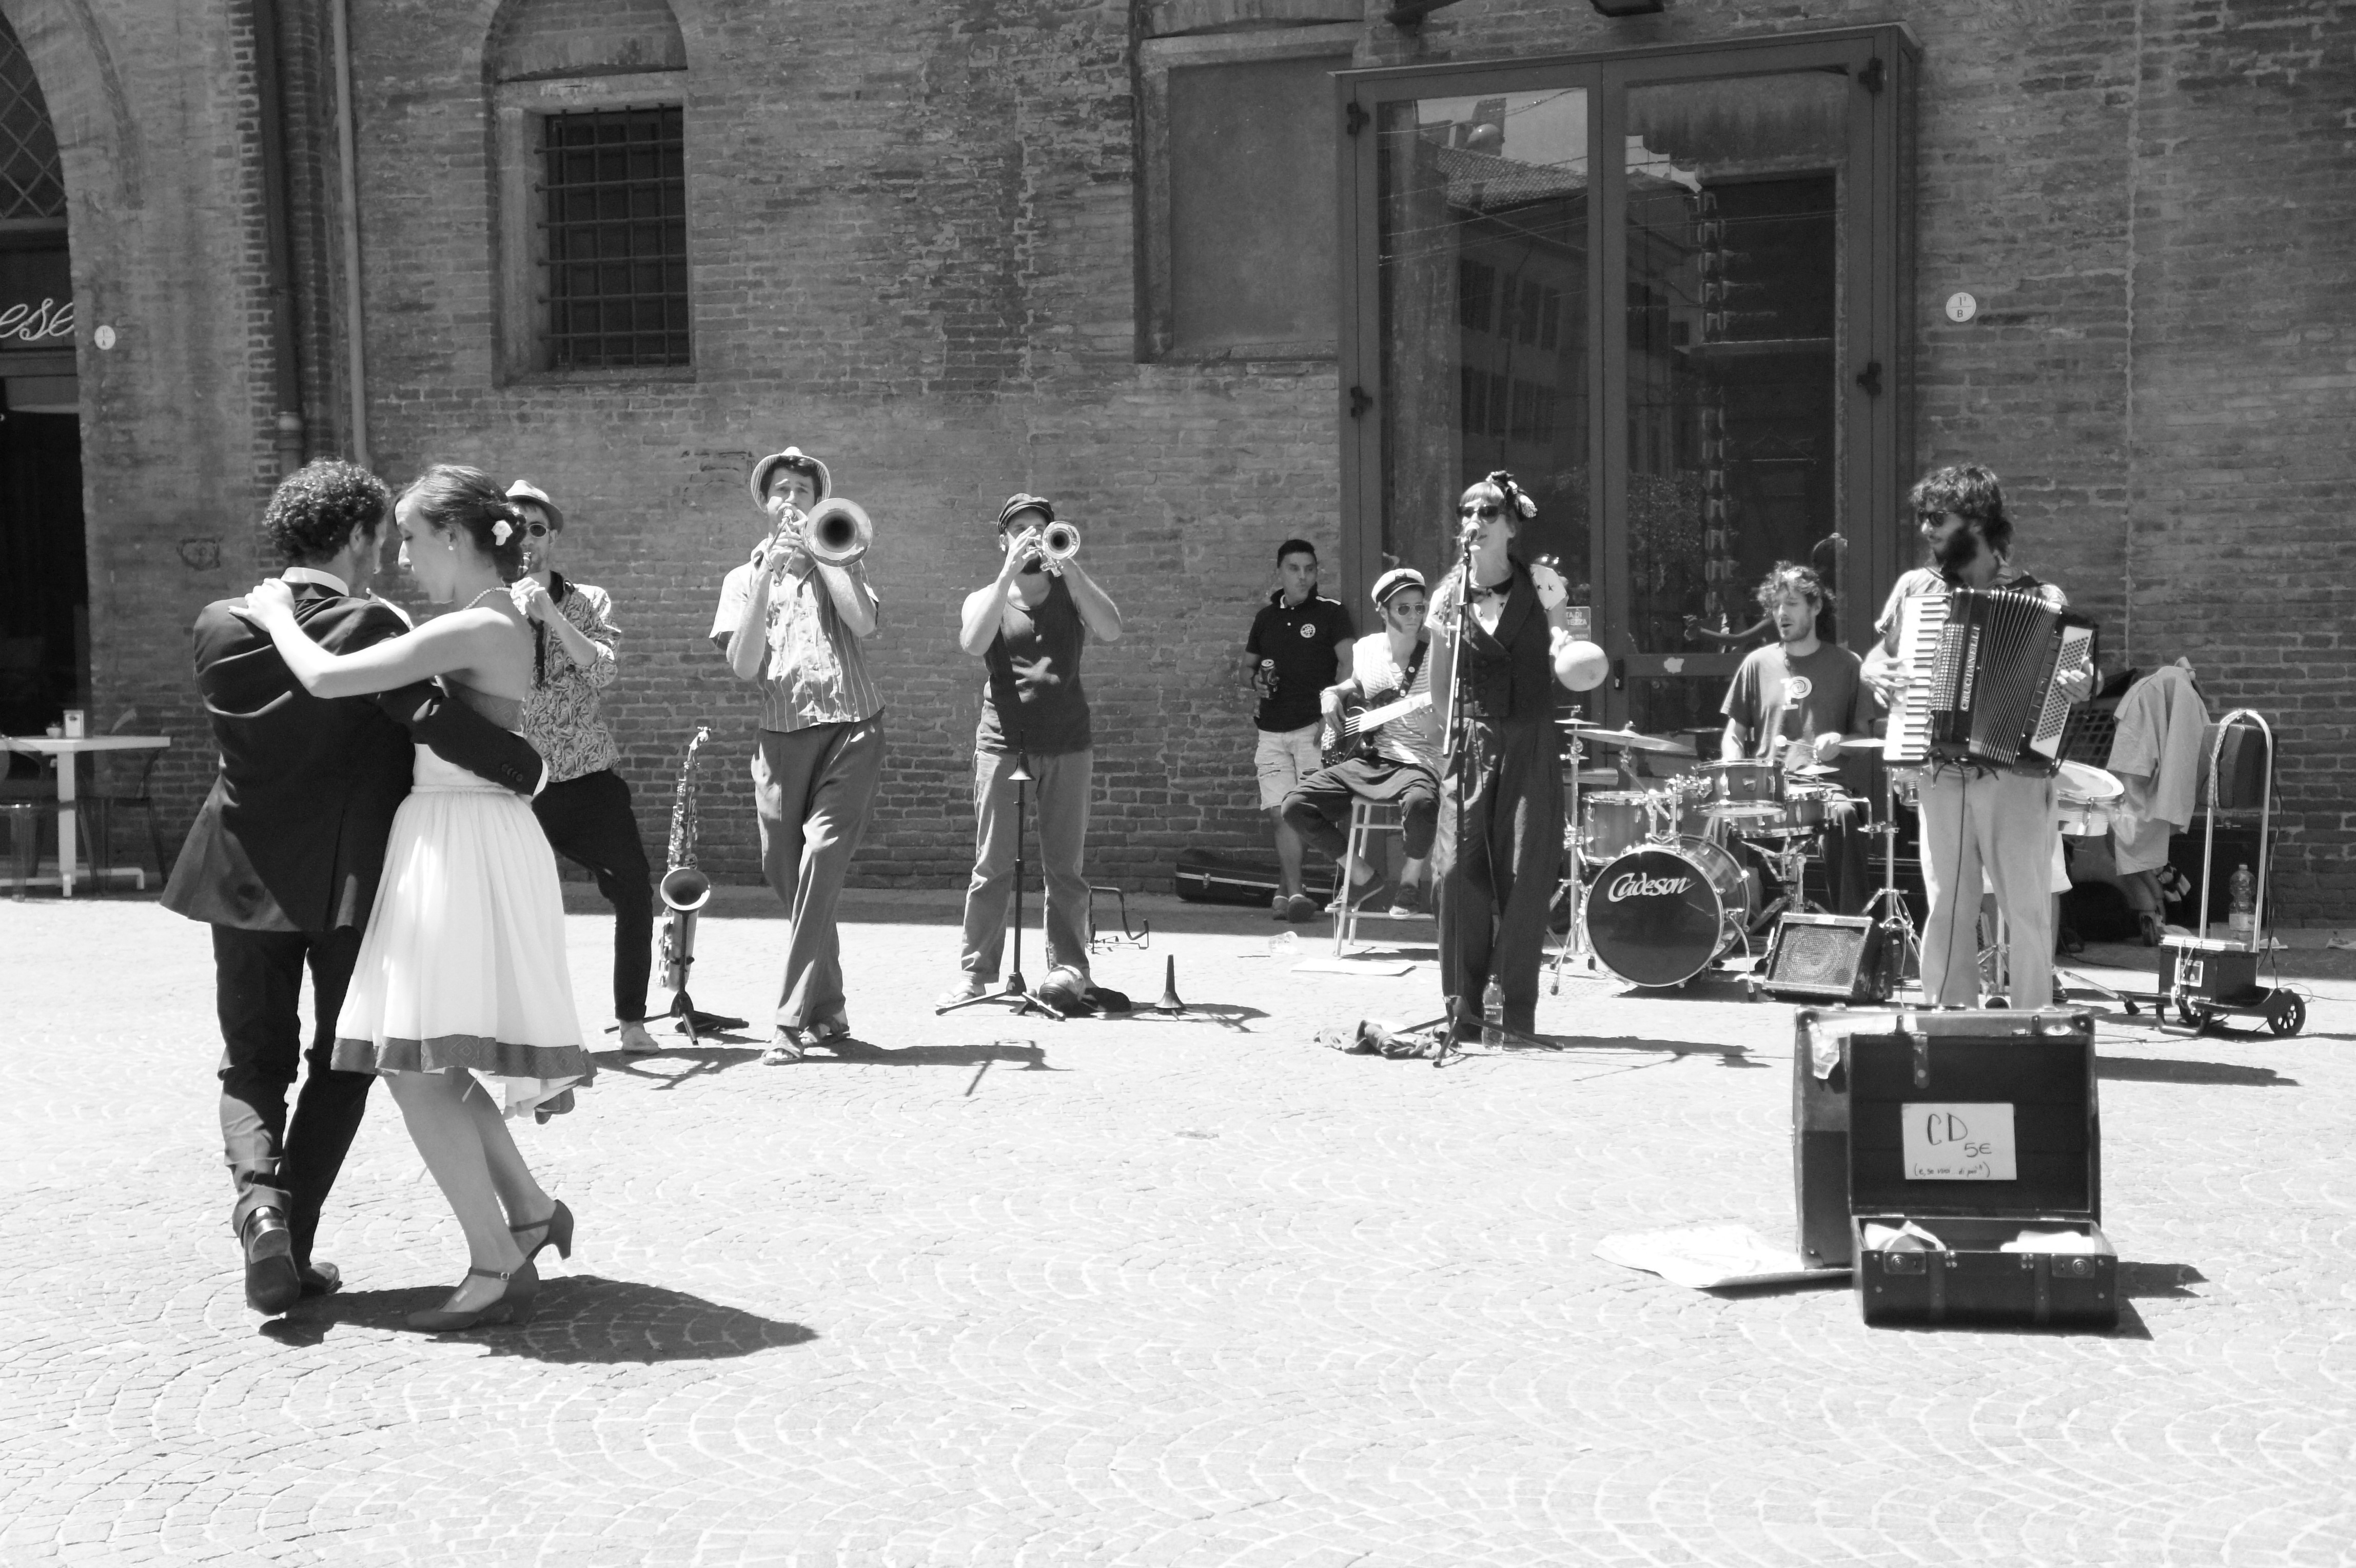 black and white photo of two people dancing in front of band playing in outdoor plaza in front of building